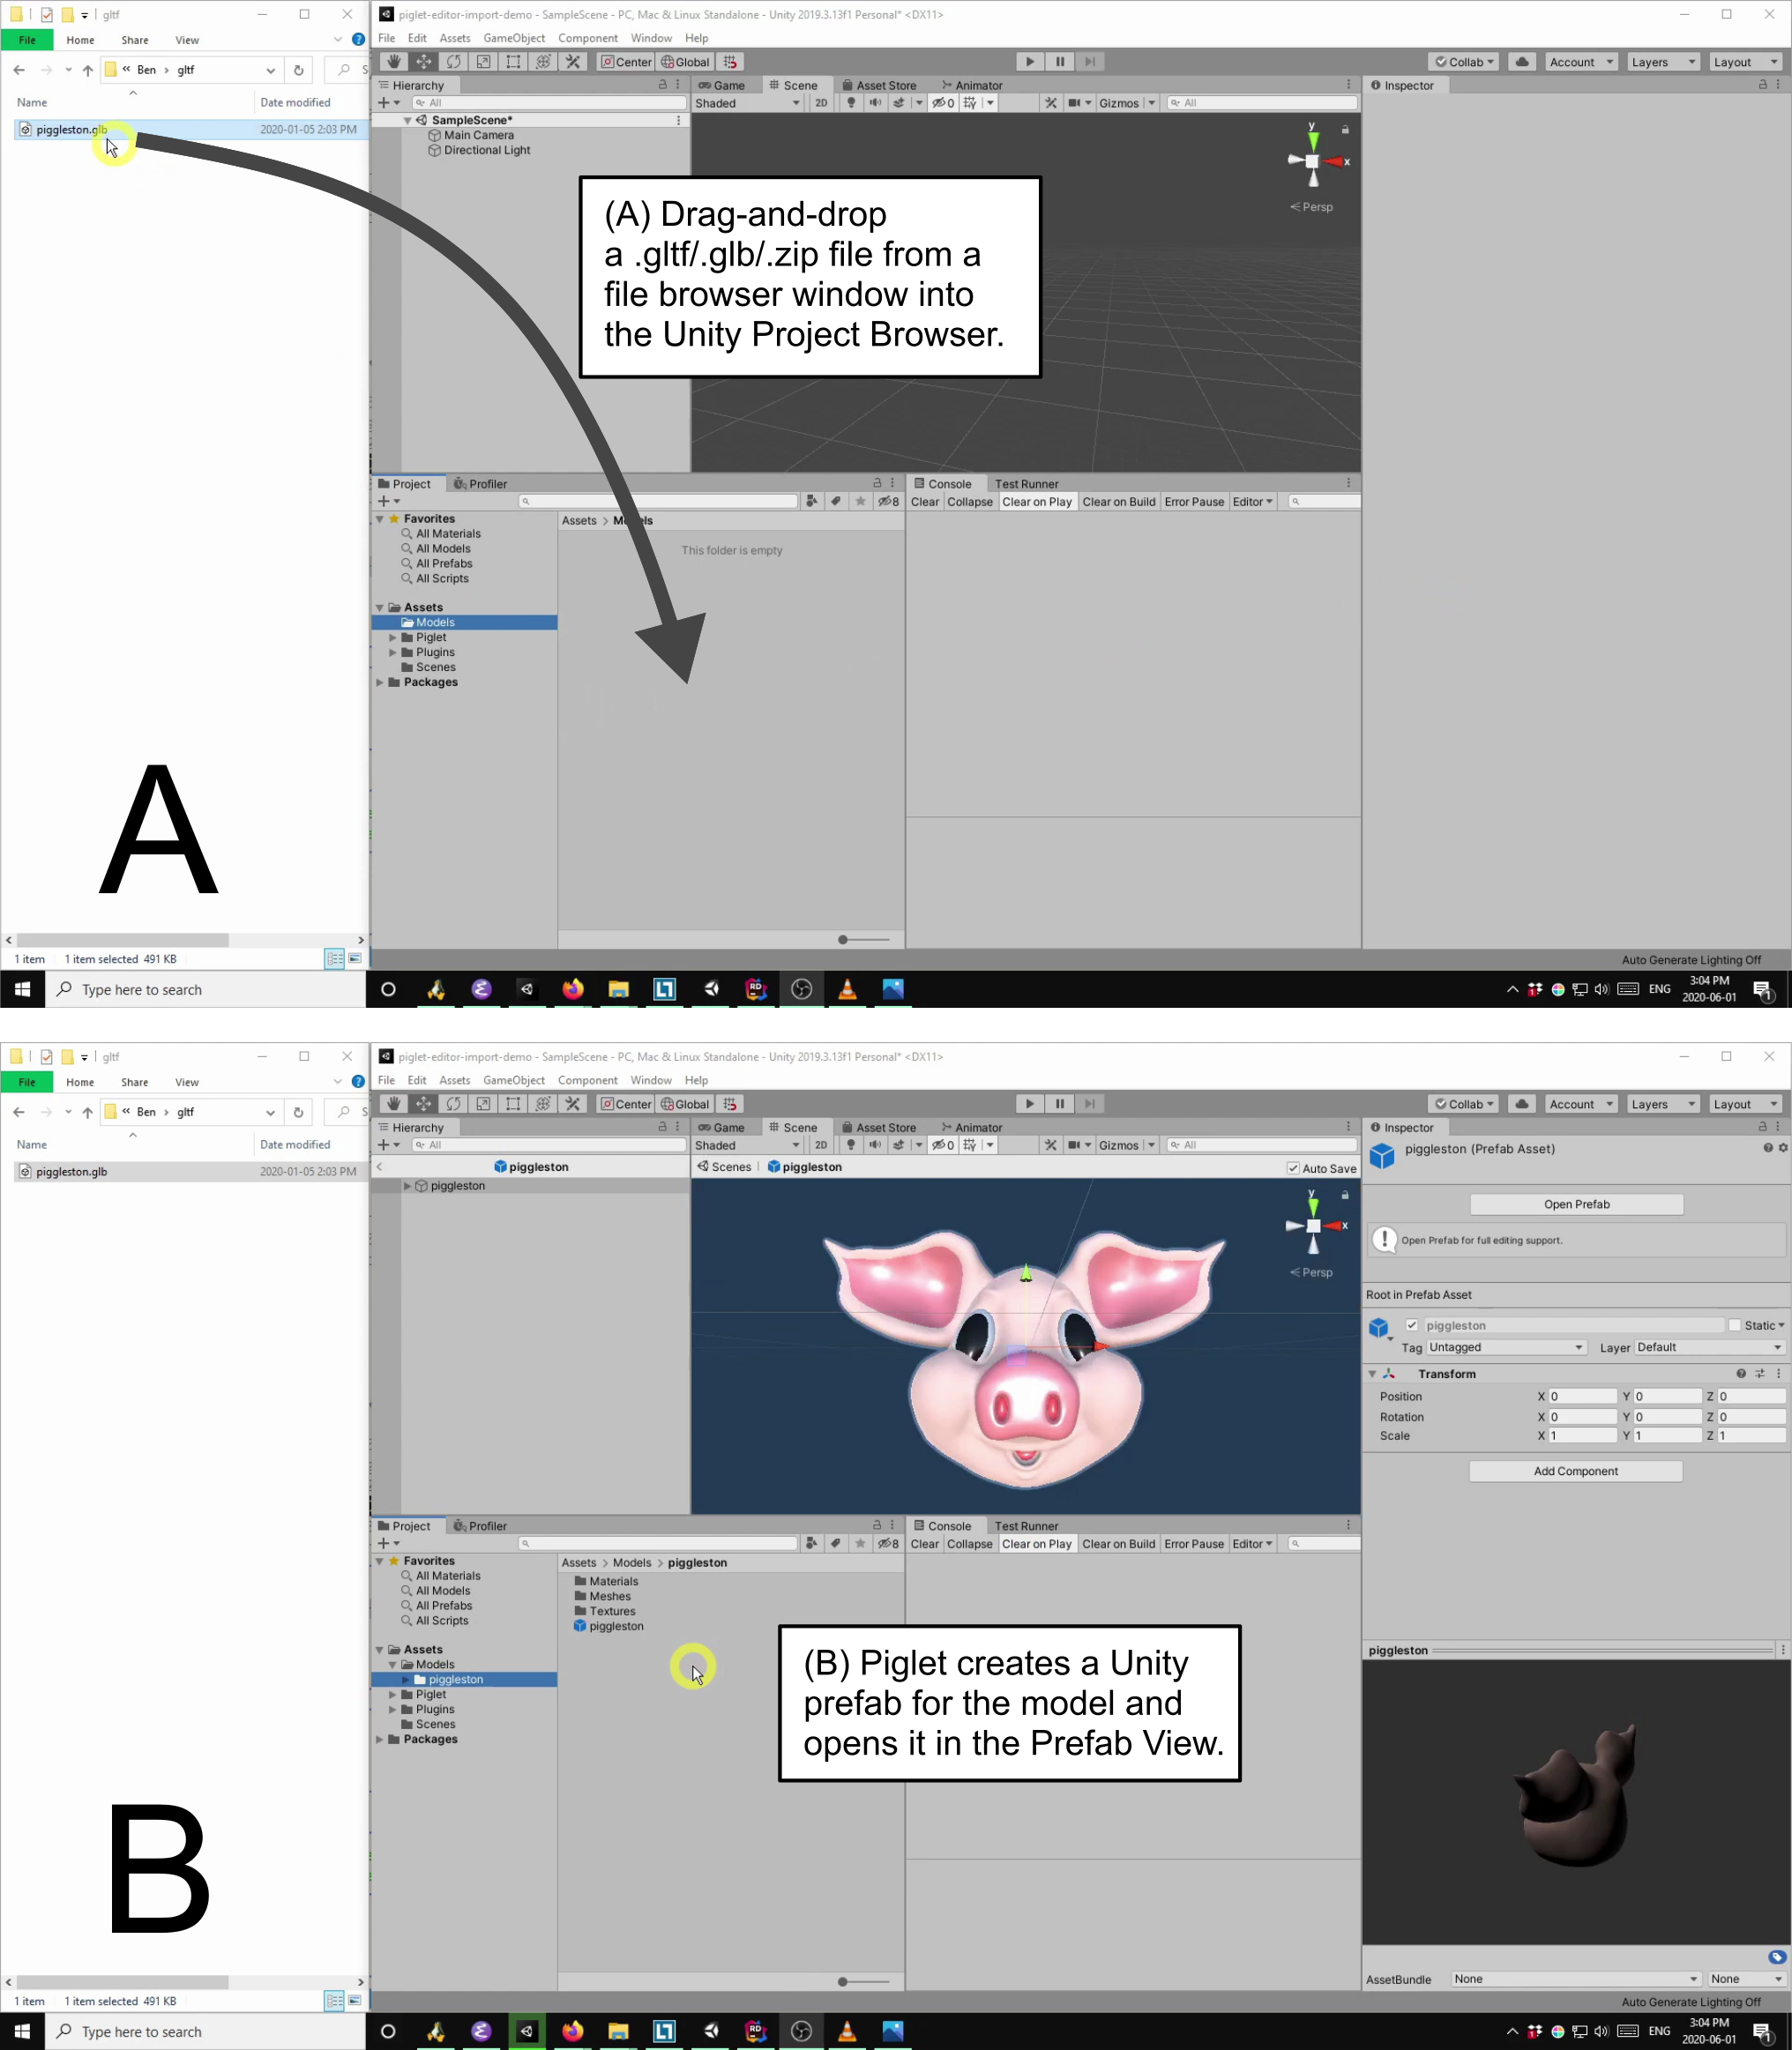 Figure 1: Importing a glTF file via drag-and-drop. (A) The user drags-and-drops a .gltf/.glb/.zip file from Windows File Explorer to the Unity Project Browser window. (B) Piglet creates a Unity prefab for the model and opens it in the Scene View.